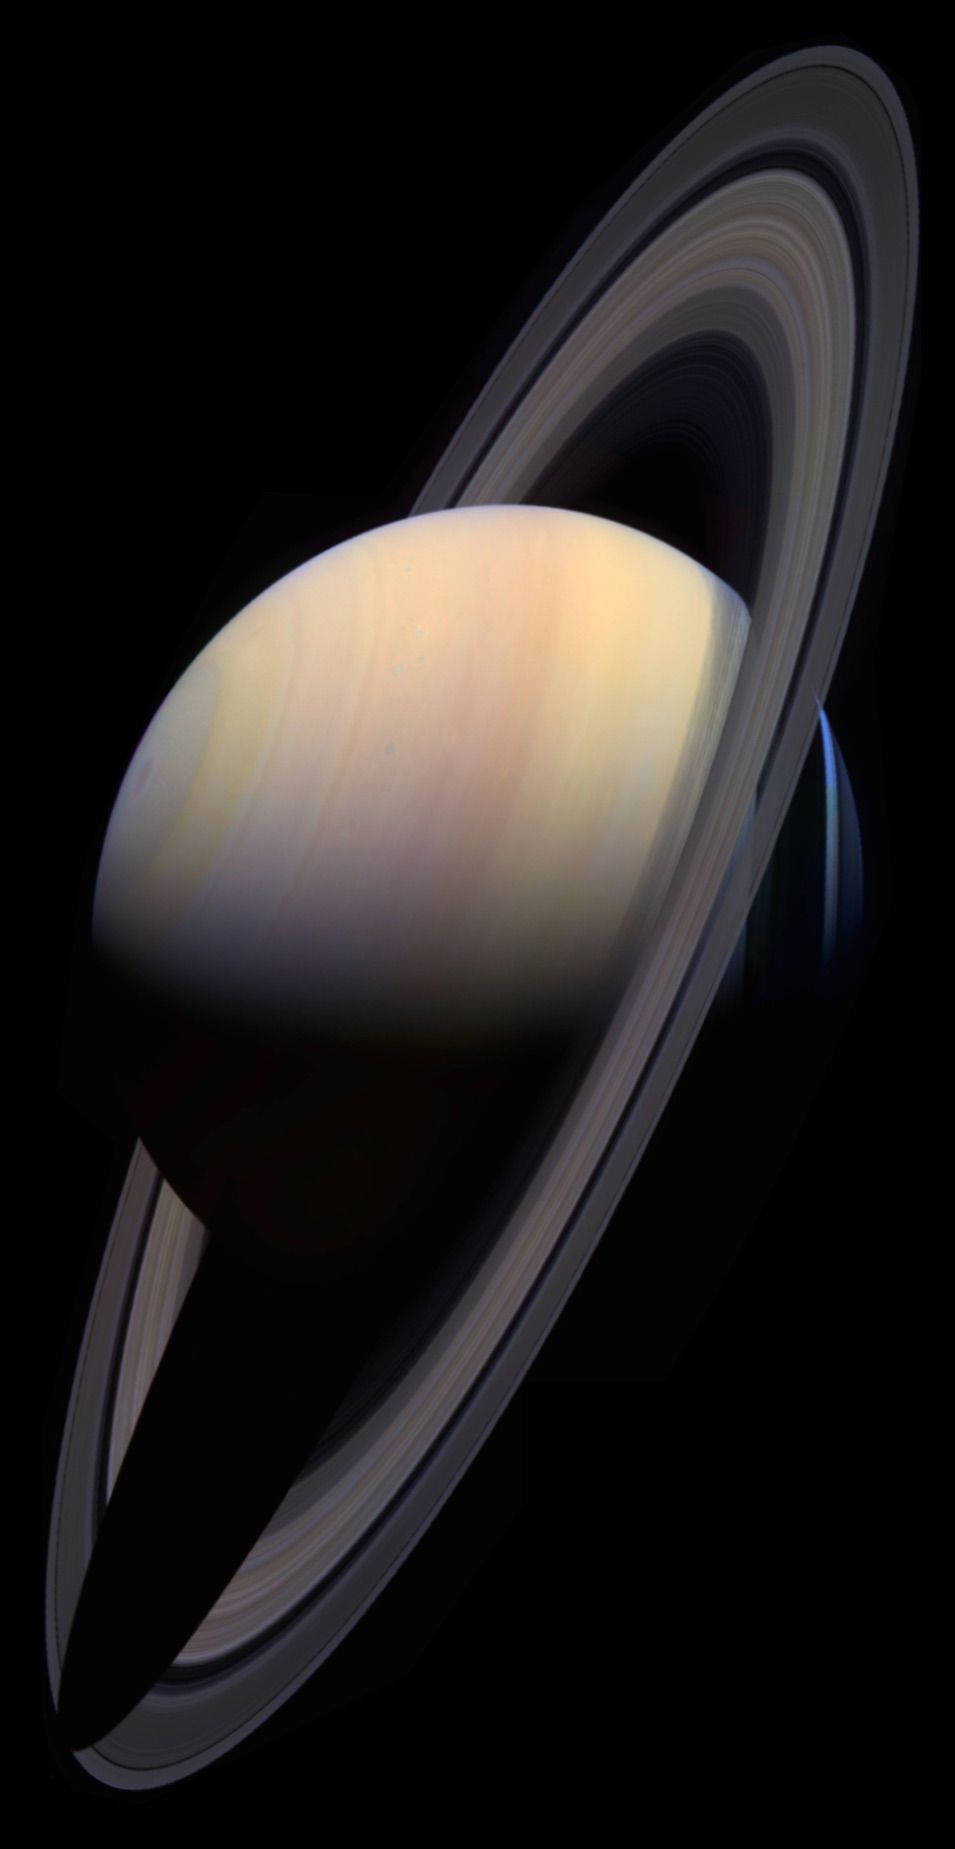 Download Planet Saturn With Ringlets Wallpaper 